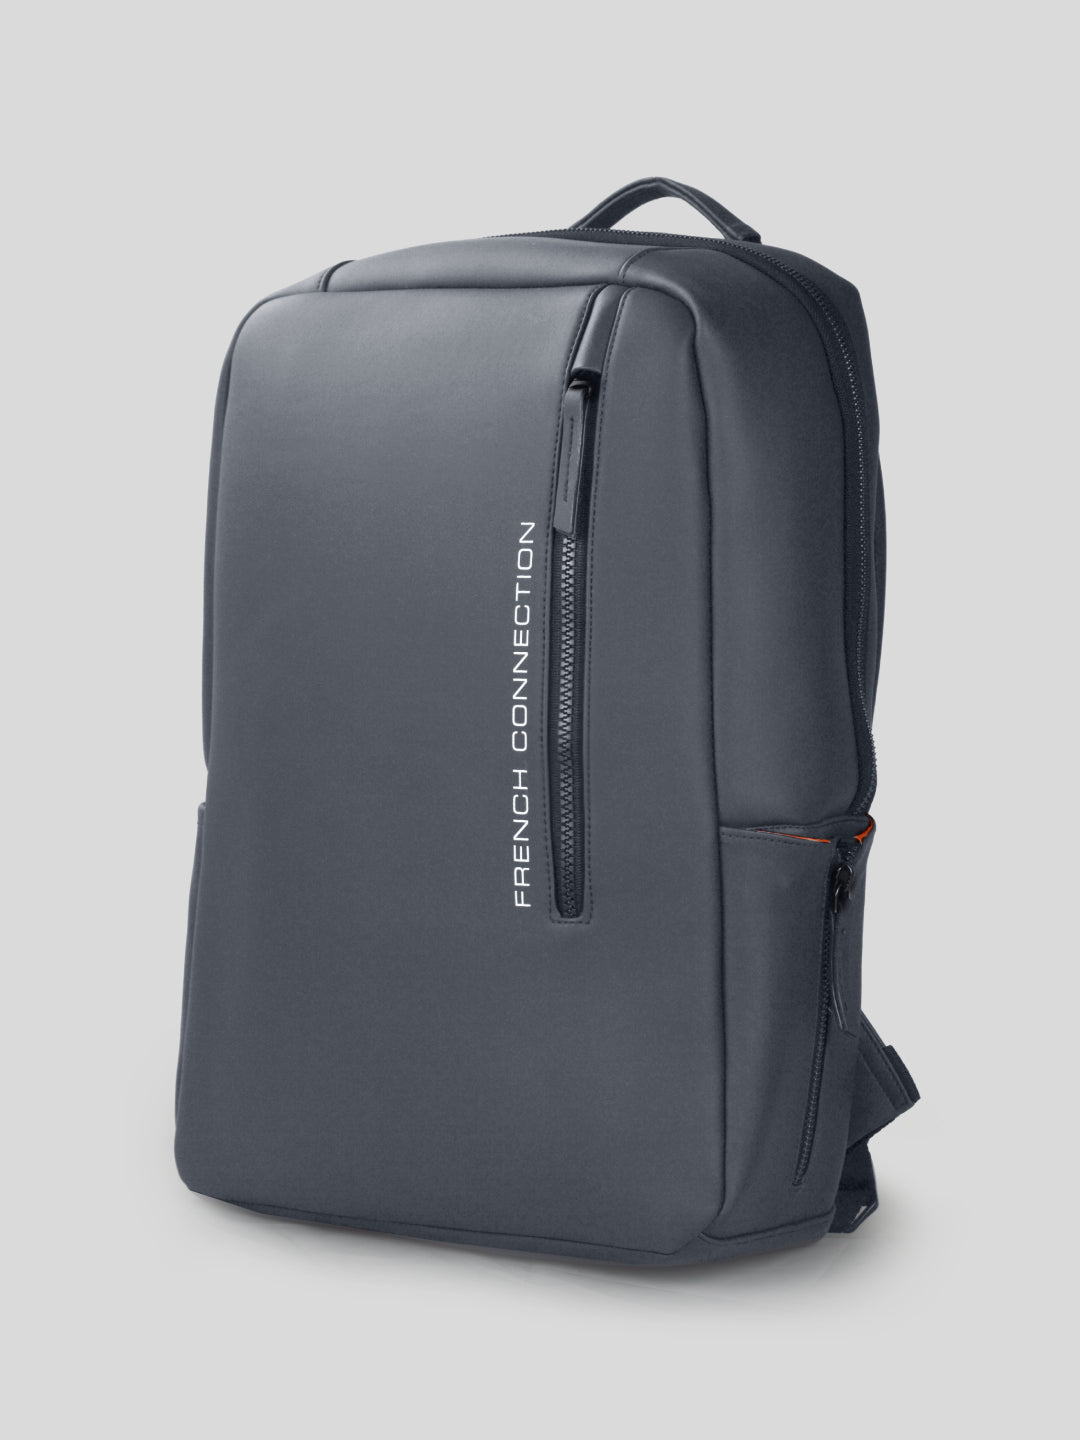 French Connection Grey Backpack